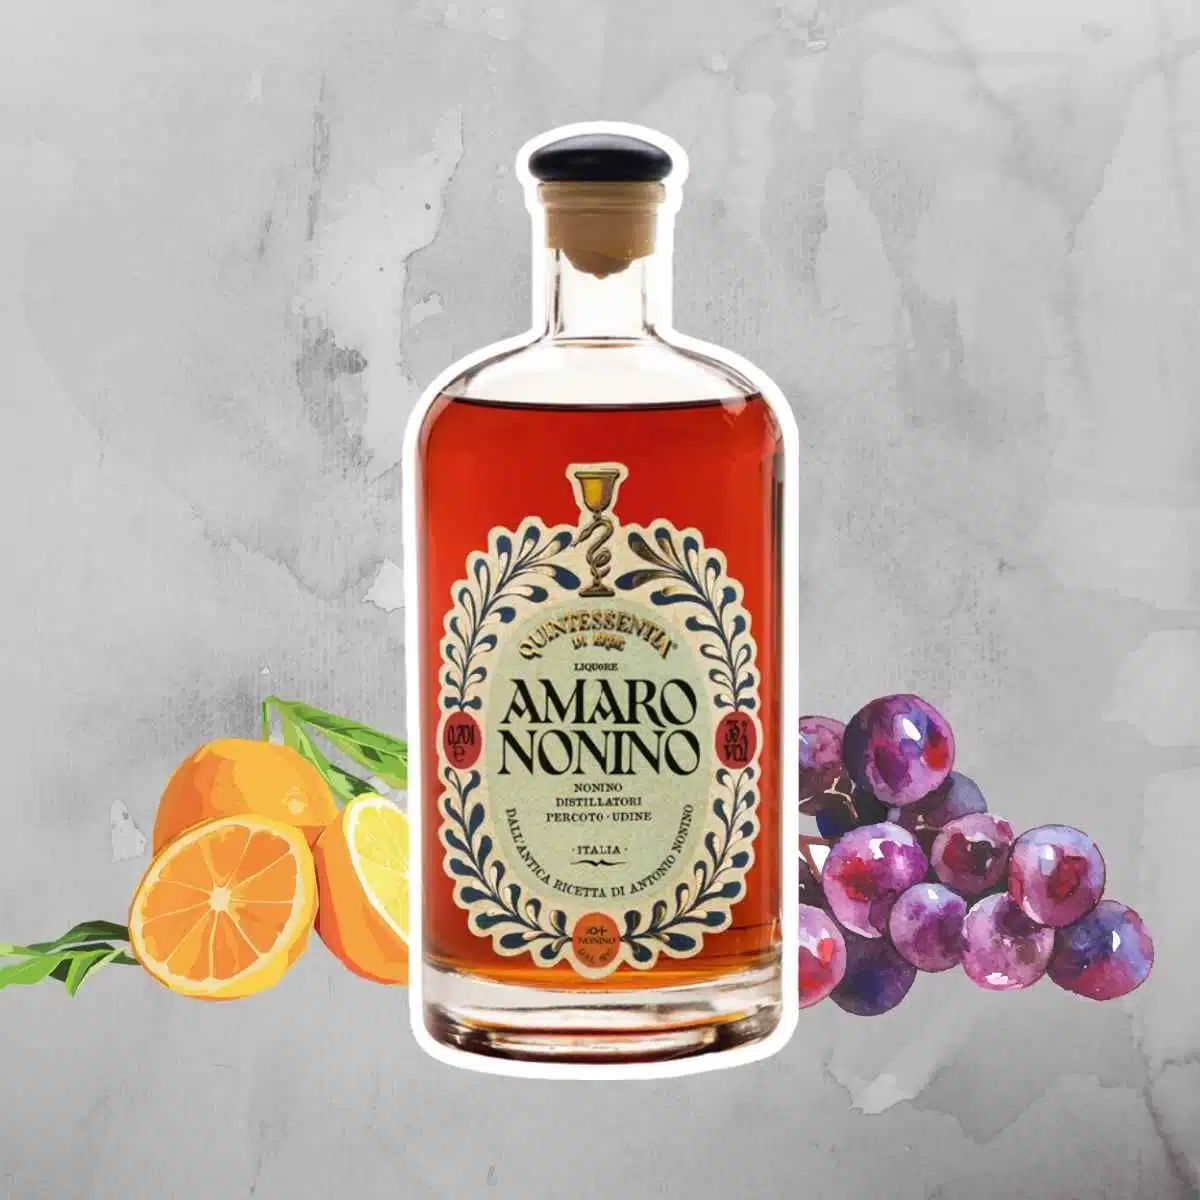 Amaro Nonino bottle with grapes and oranges in background